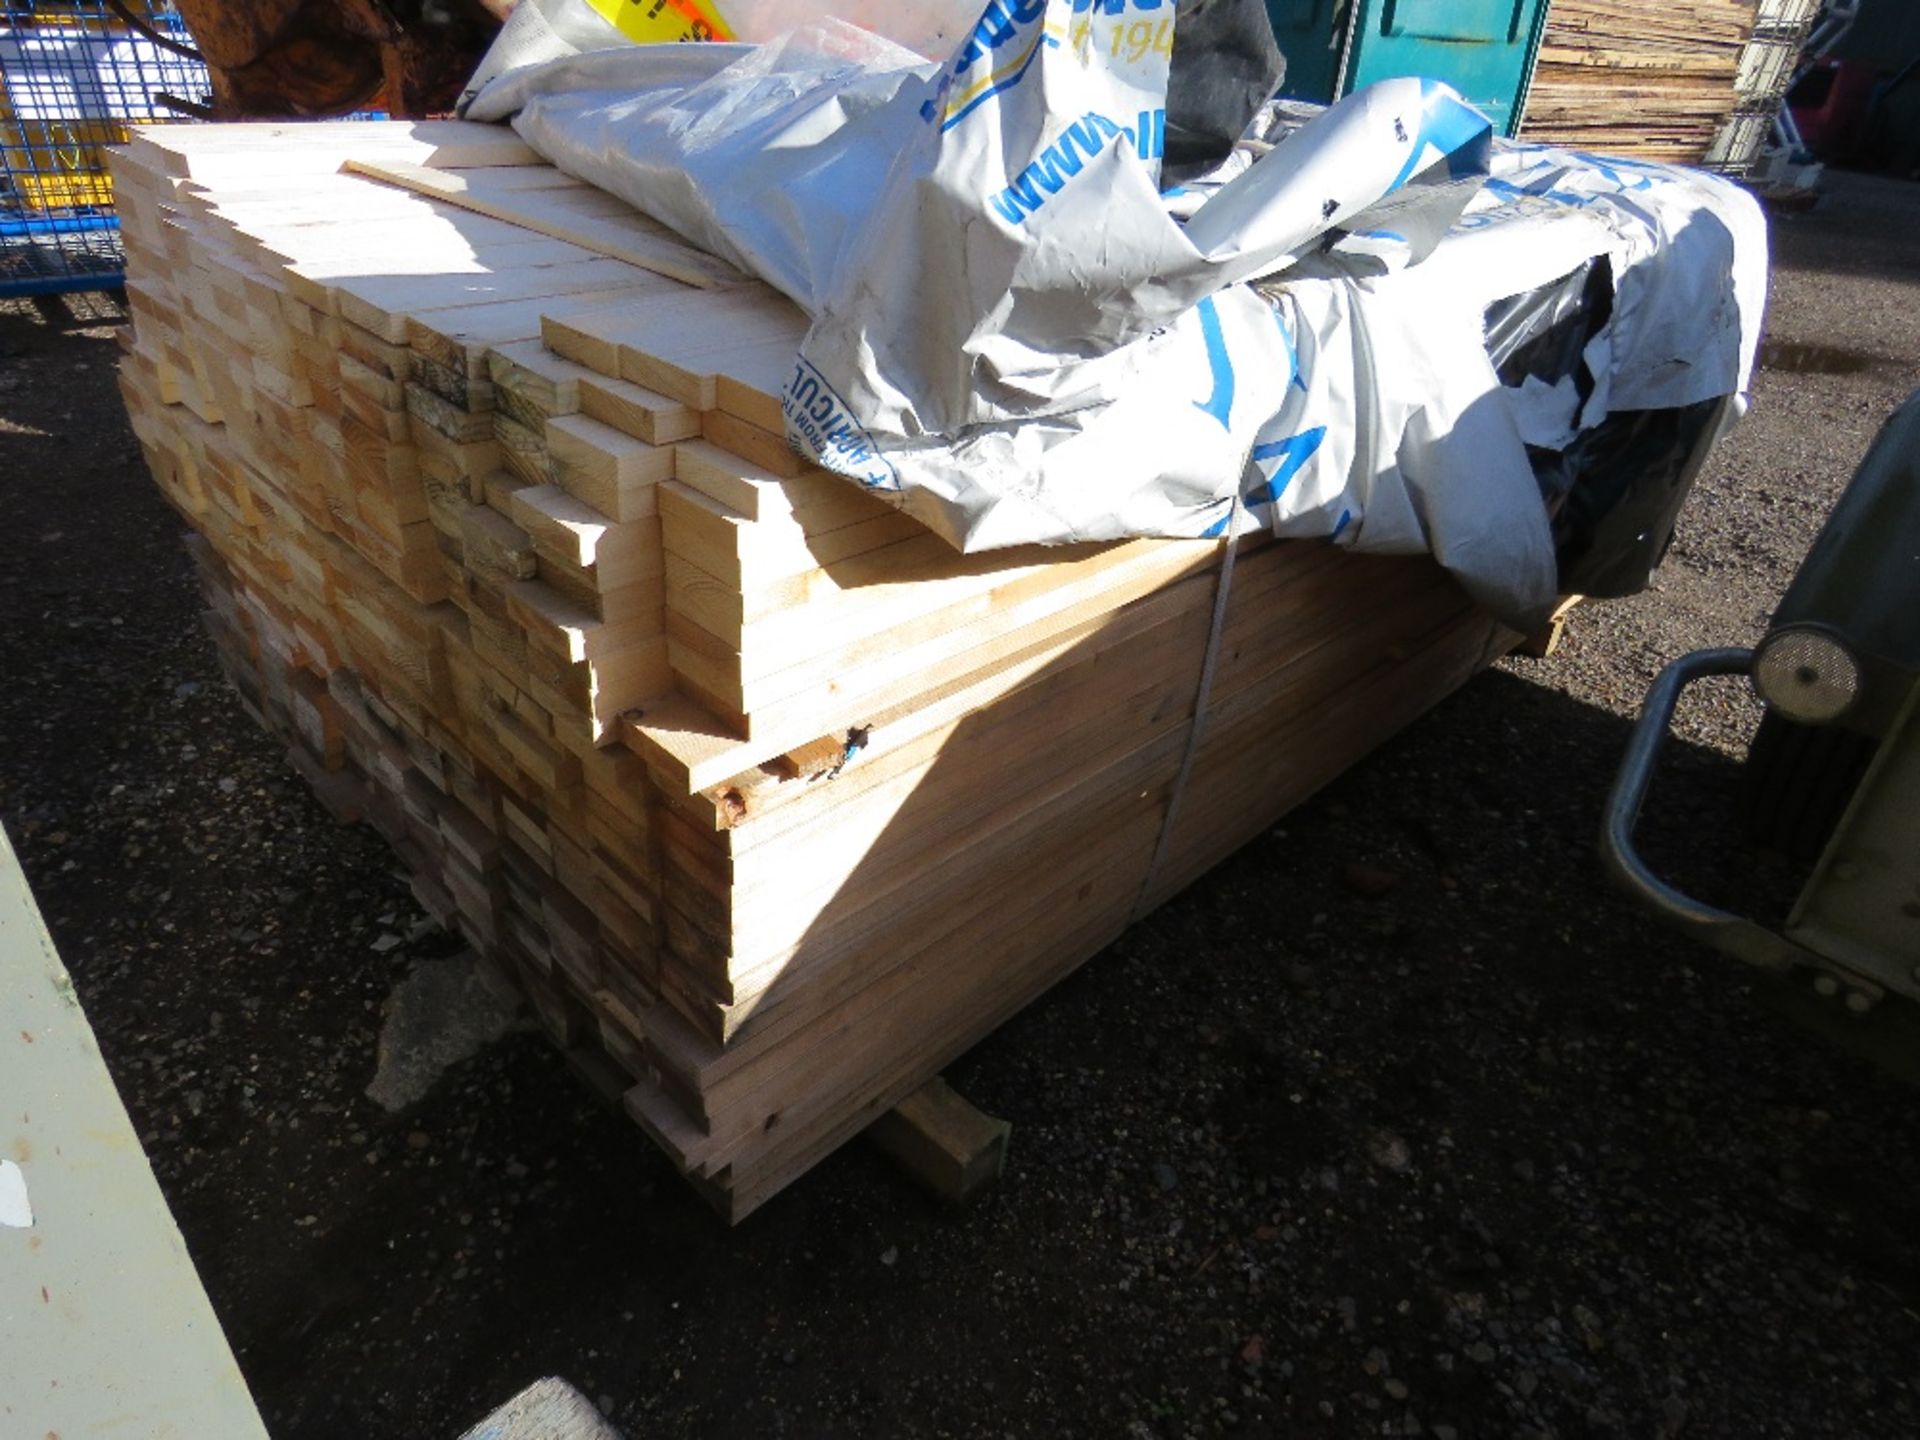 PACK OF TIMBER SLATS / BOARDS, UNTREATED. SIZE: 1.8M LENGTH X 70MM WIDE X 20MM DEPTH APPROX.